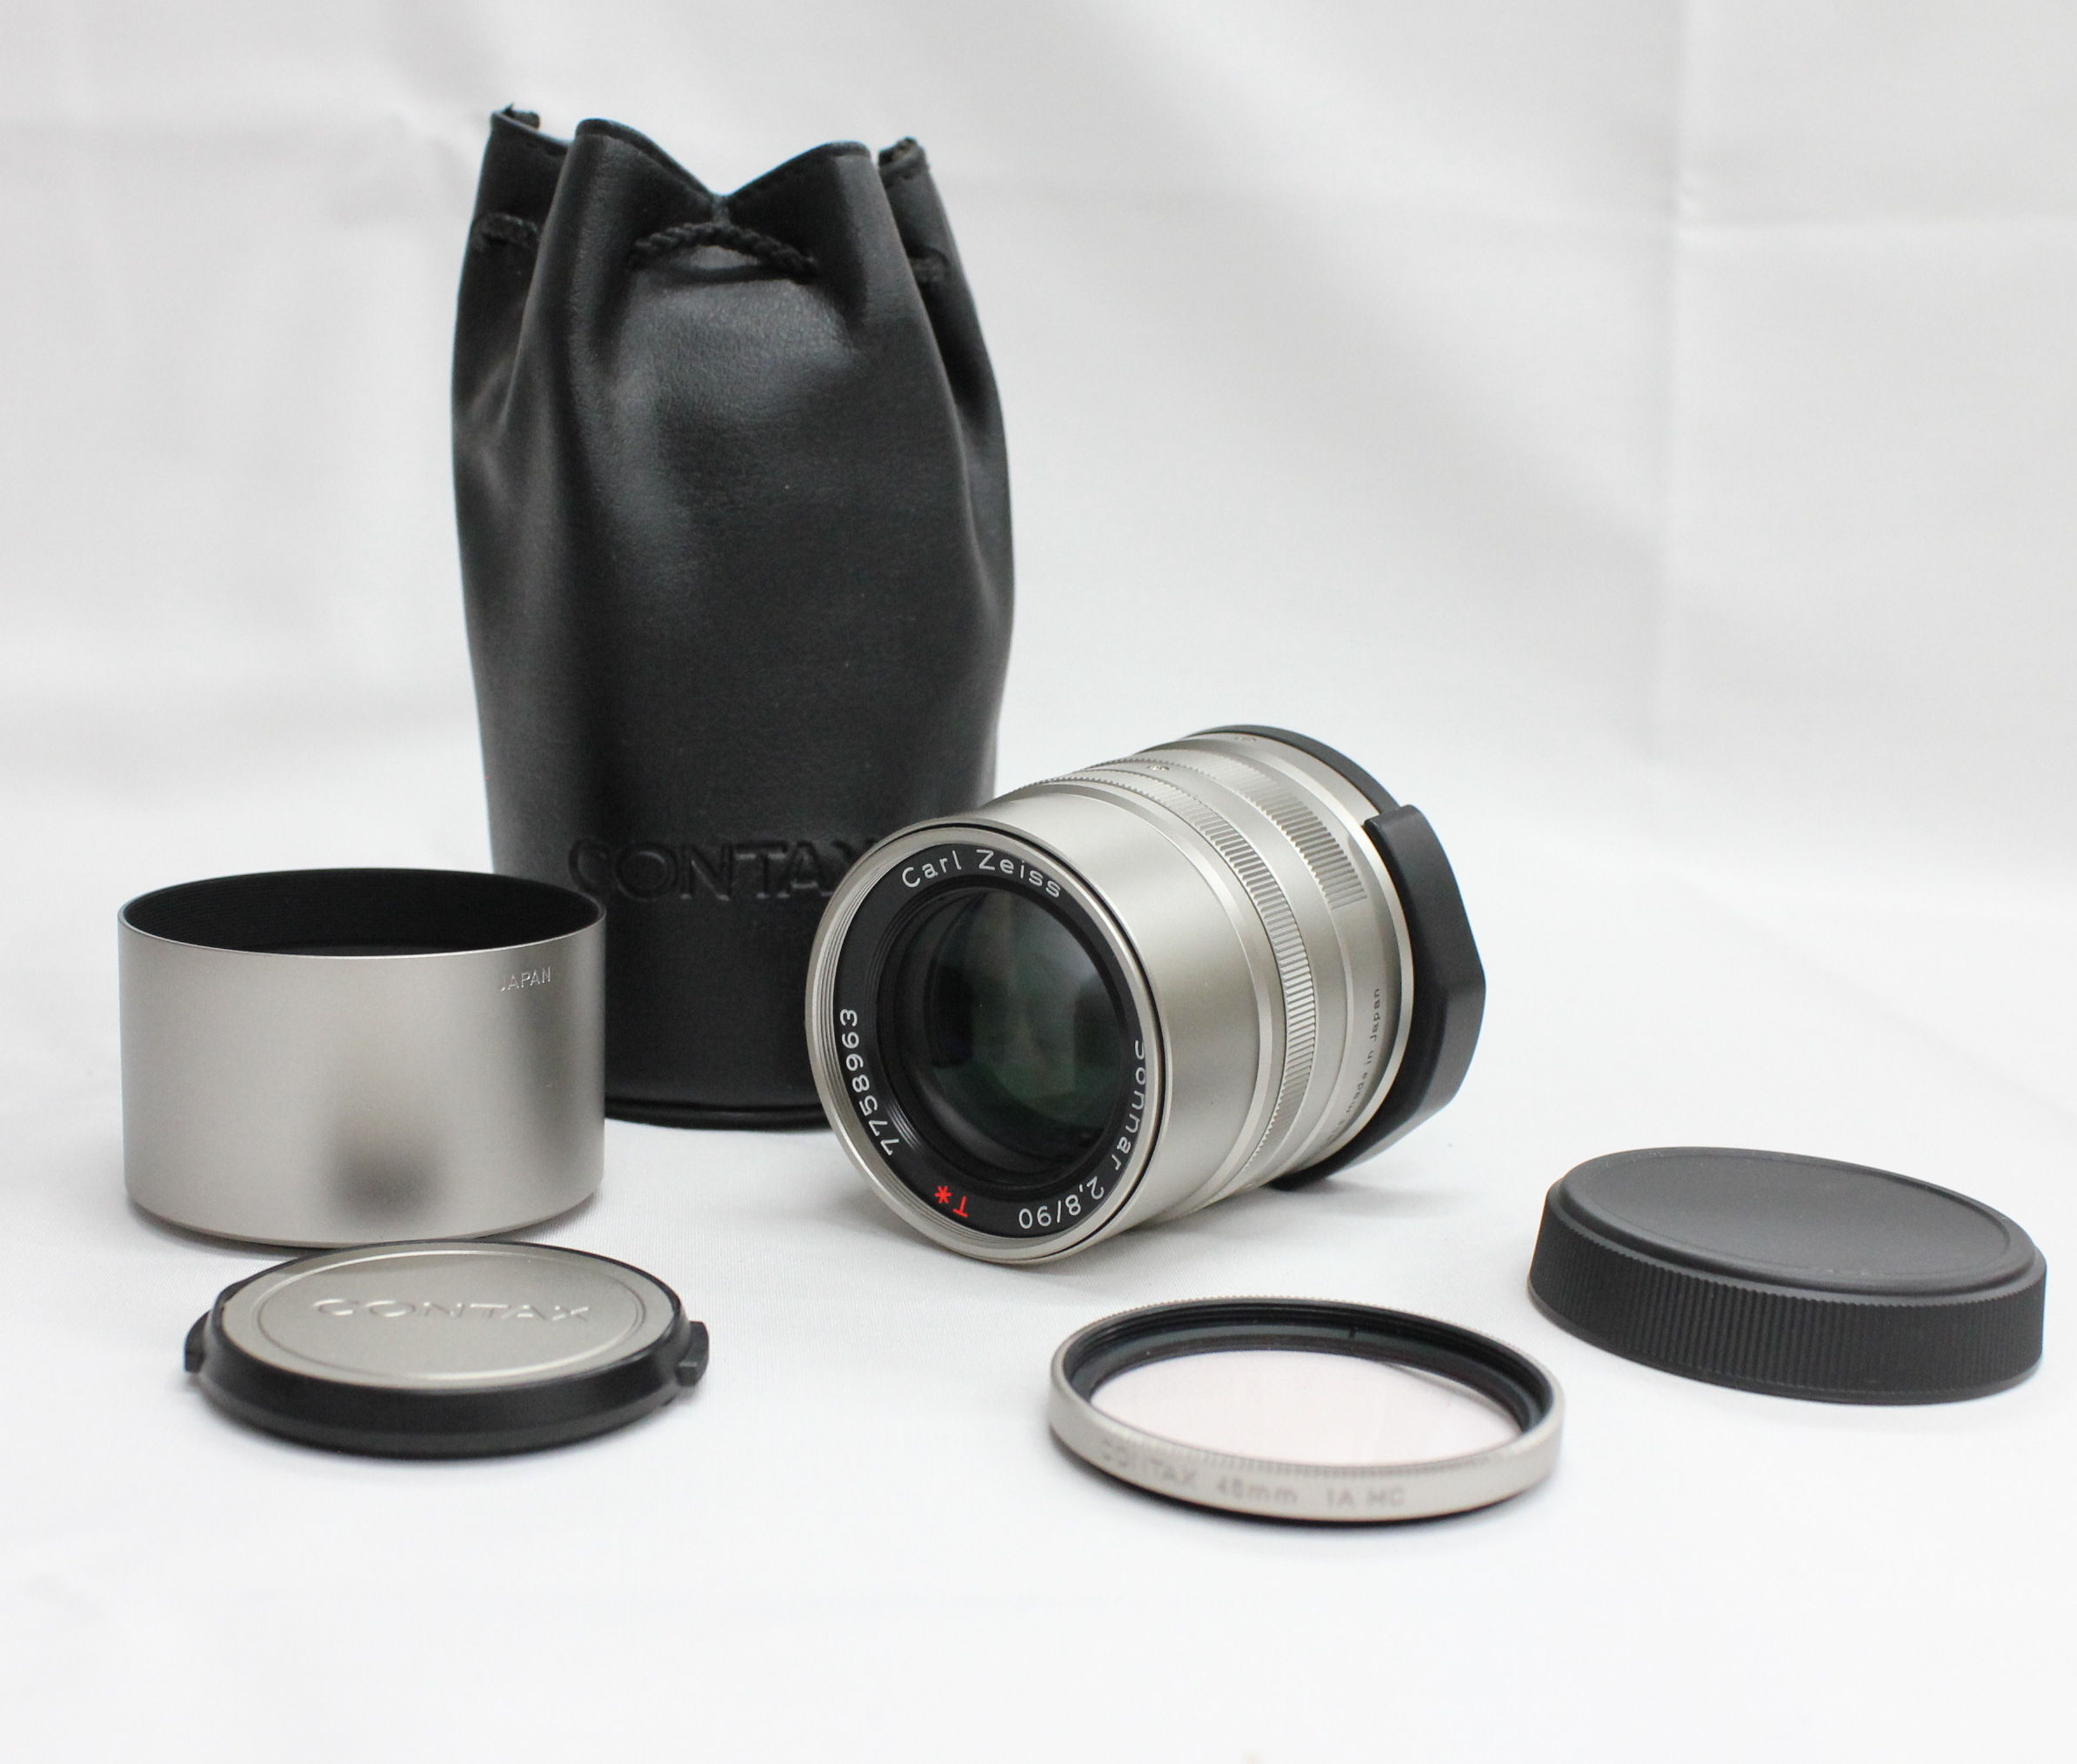 Contax Carl Zeiss Sonnar 90mm F/2.8 T* AF Lens with Hood/Filter/Case for G1  G2 from JAPAN (C1190) | Big Fish J-Camera (Big Fish J-Shop)